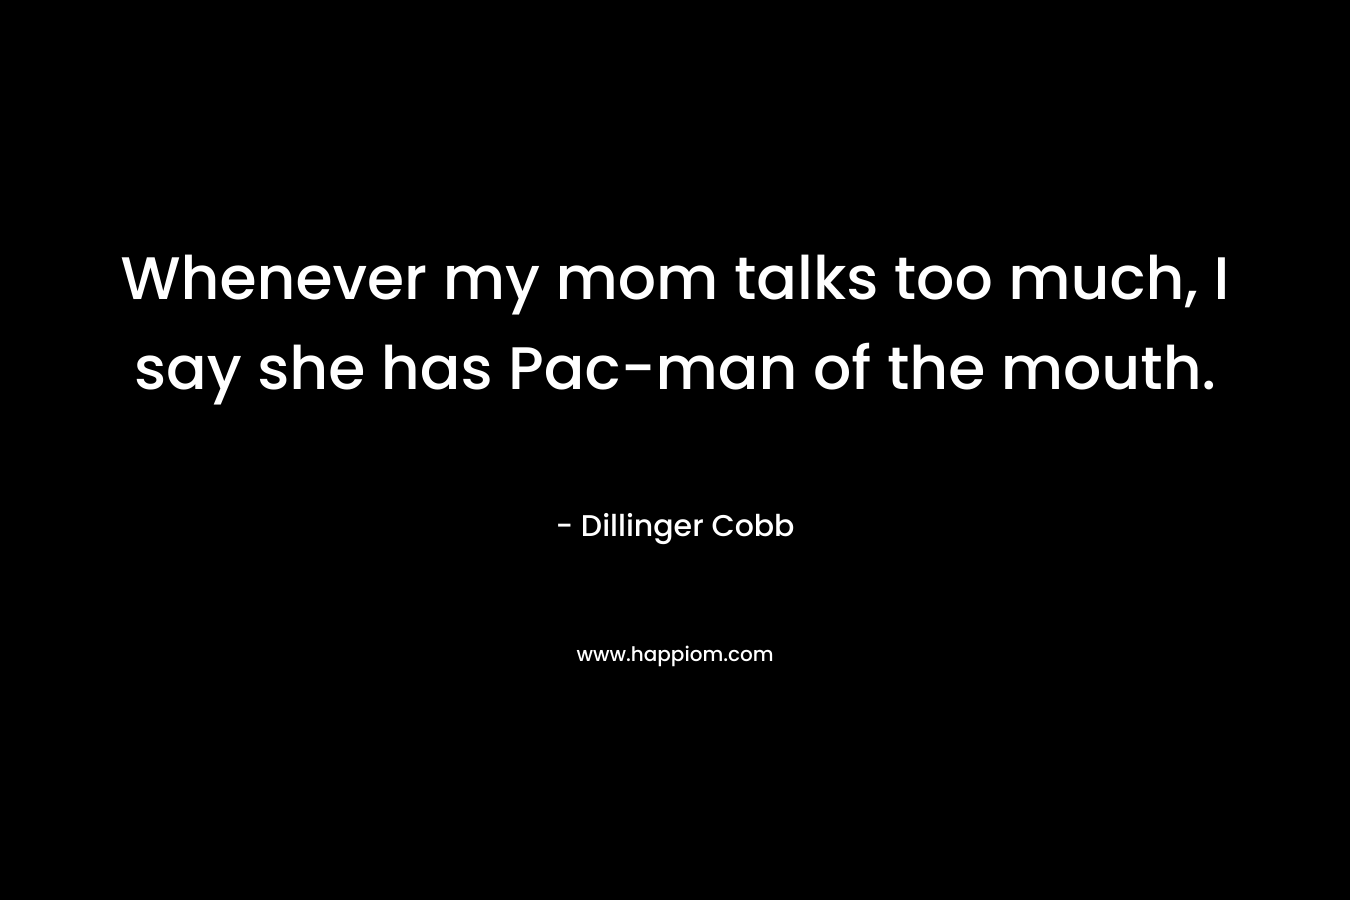 Whenever my mom talks too much, I say she has Pac-man of the mouth. – Dillinger Cobb